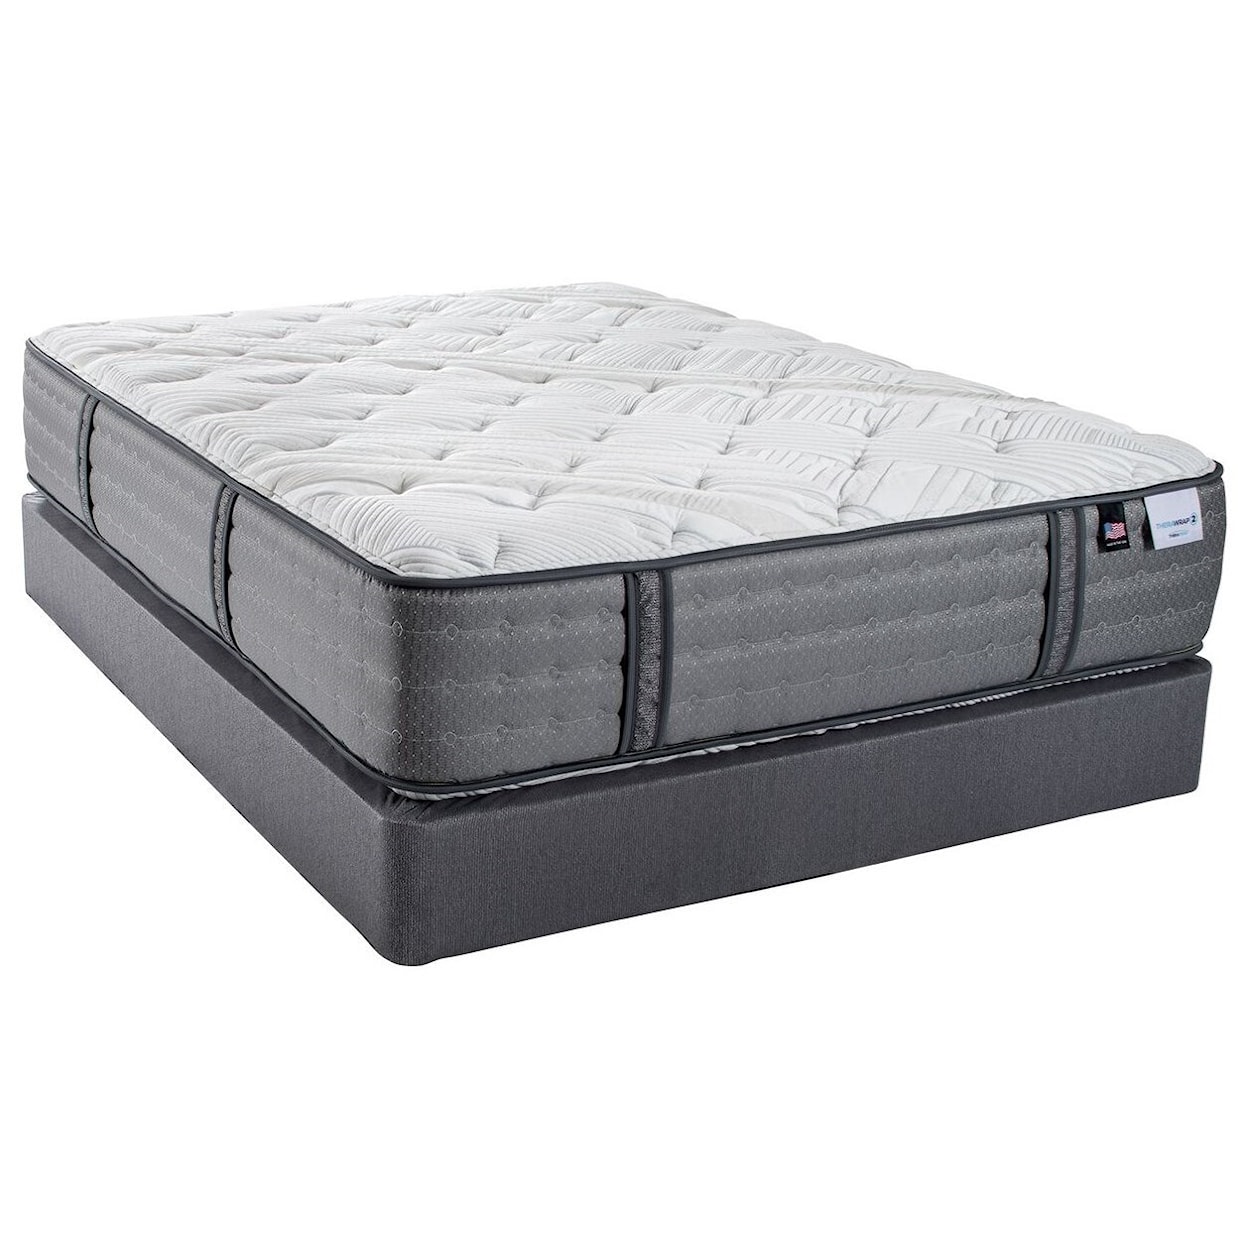 Therapedic Therawrap 2 Elle Luxury Firm Queen 2 Sided Luxury Firm Mattress Set